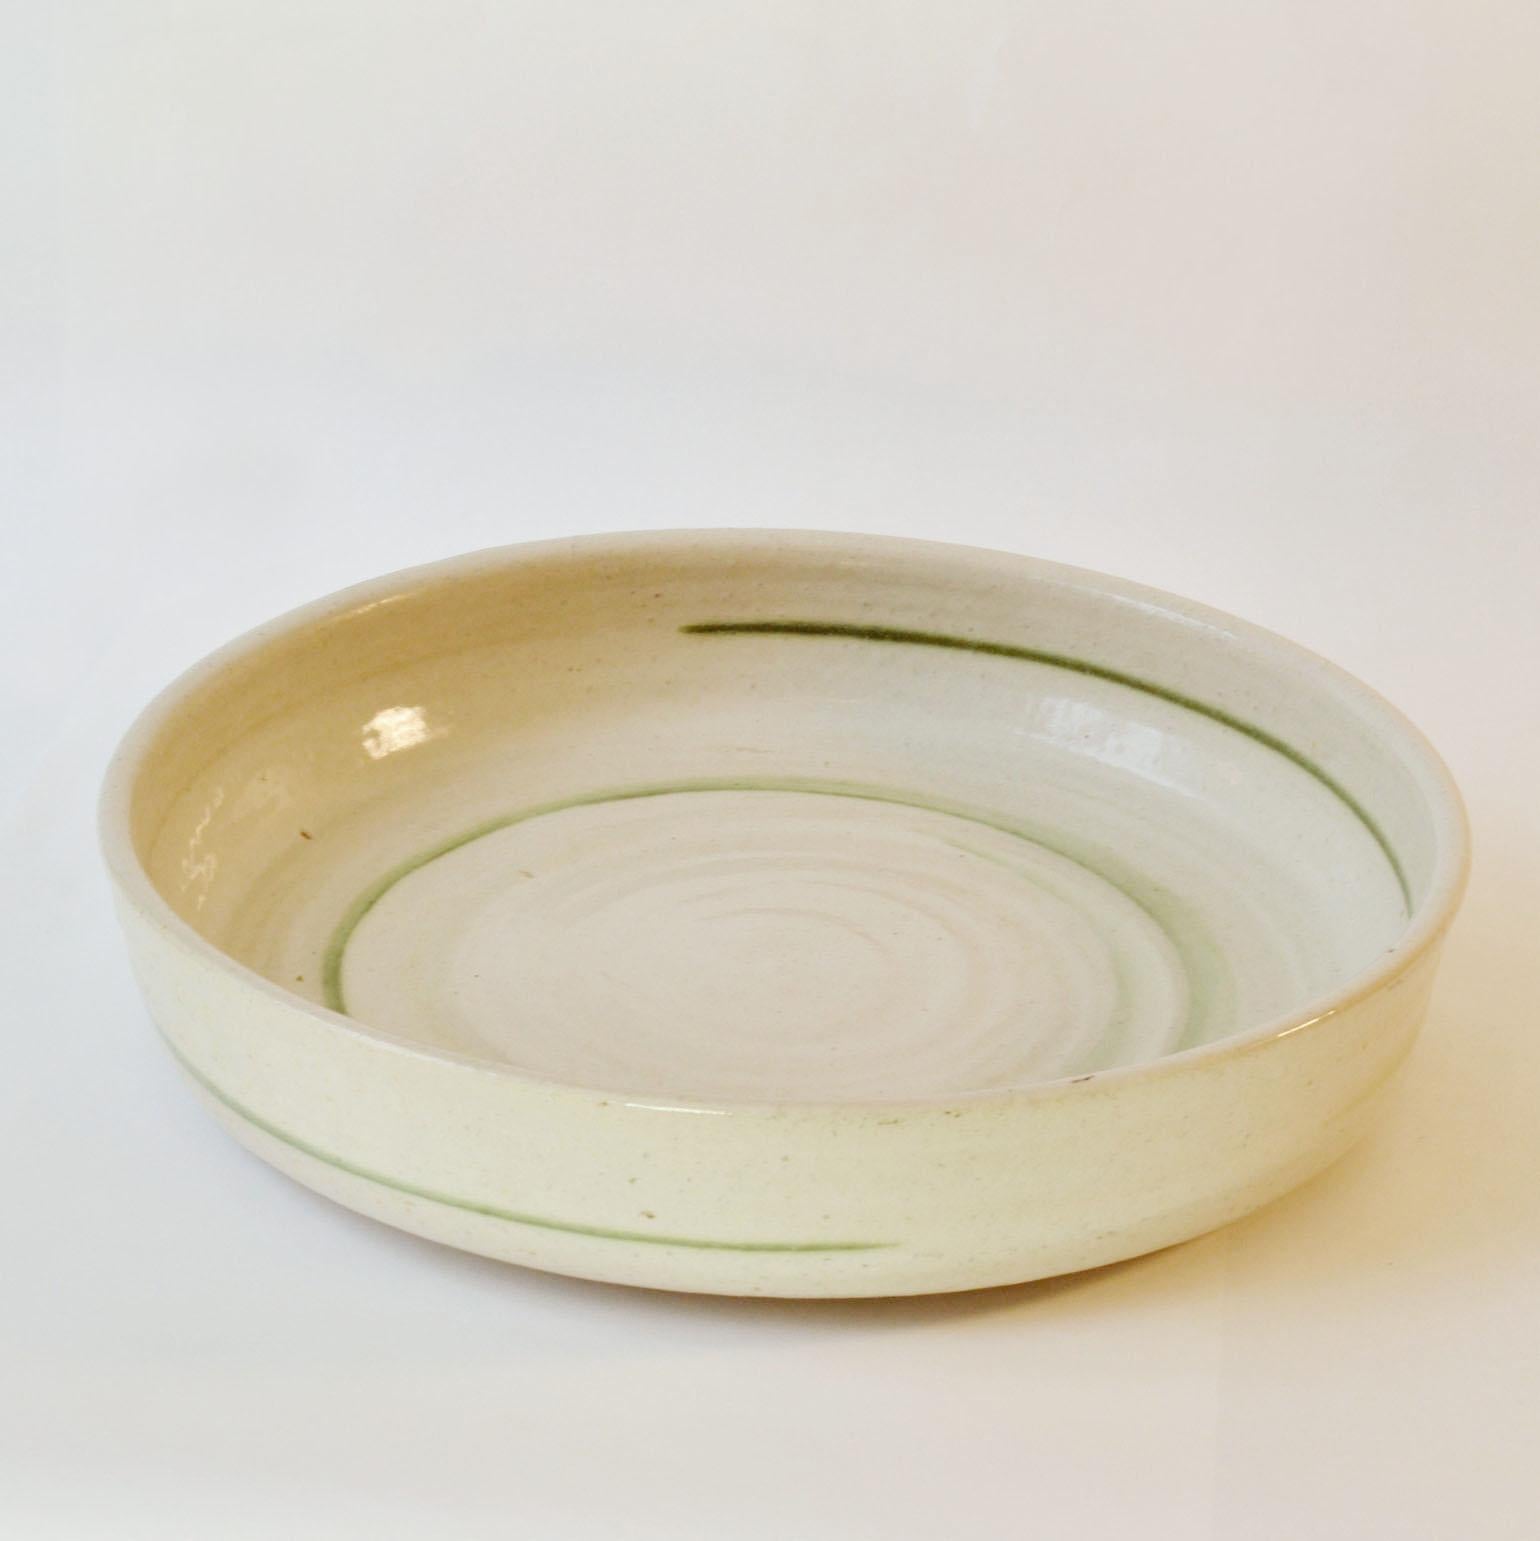 Large Studio Pottery Fruit bowl by Mobach 1980's In Excellent Condition For Sale In London, GB